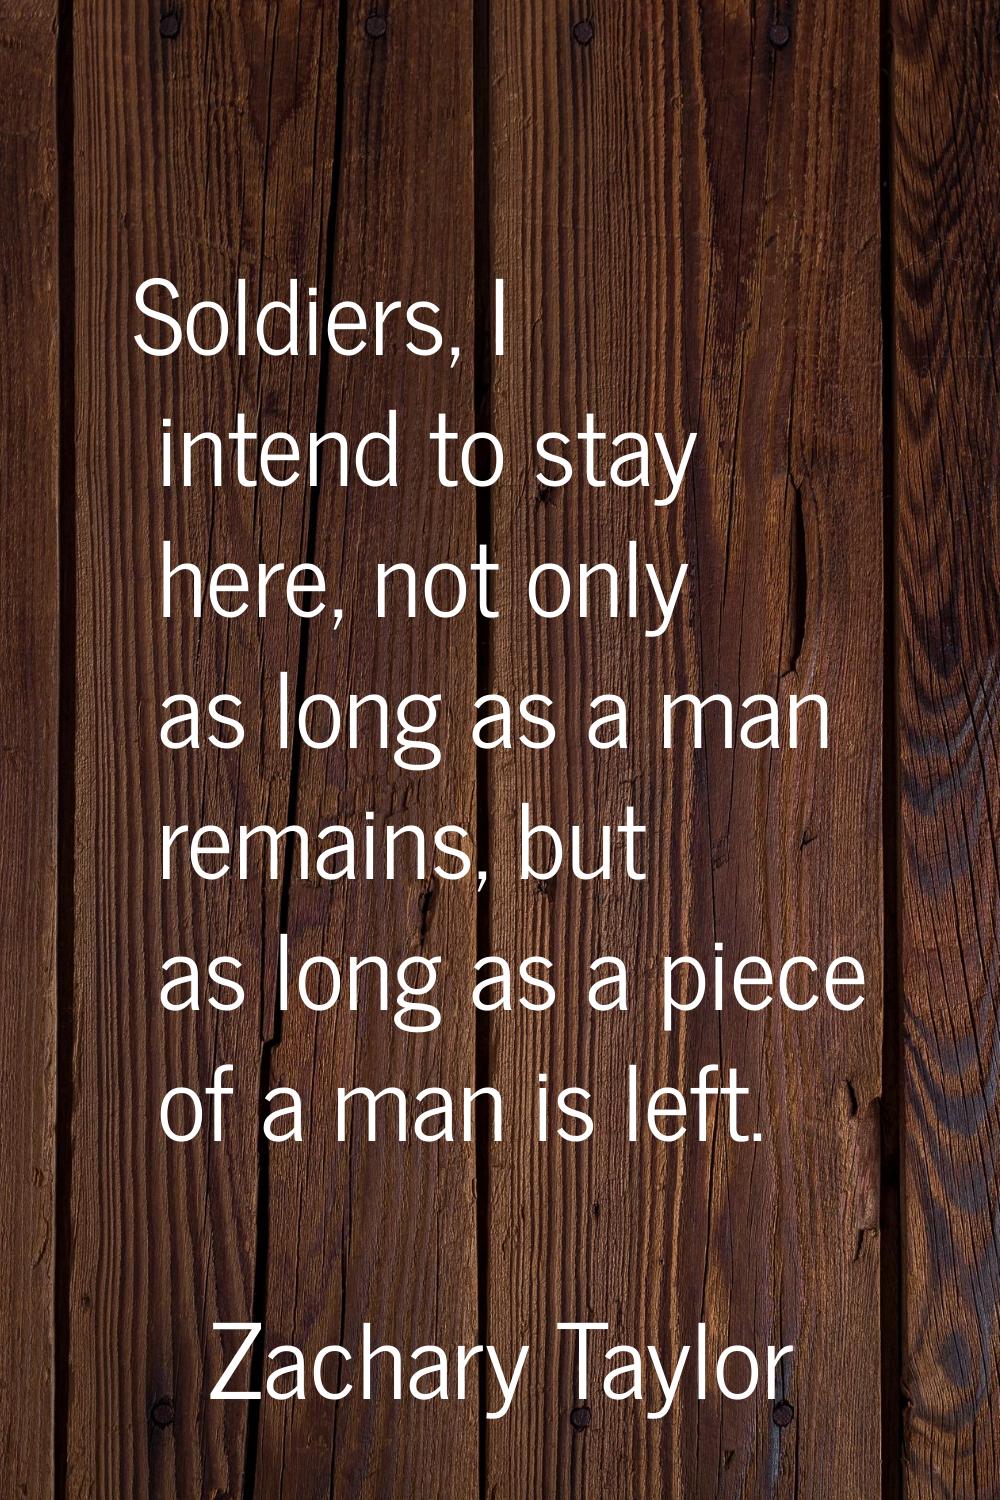 Soldiers, I intend to stay here, not only as long as a man remains, but as long as a piece of a man